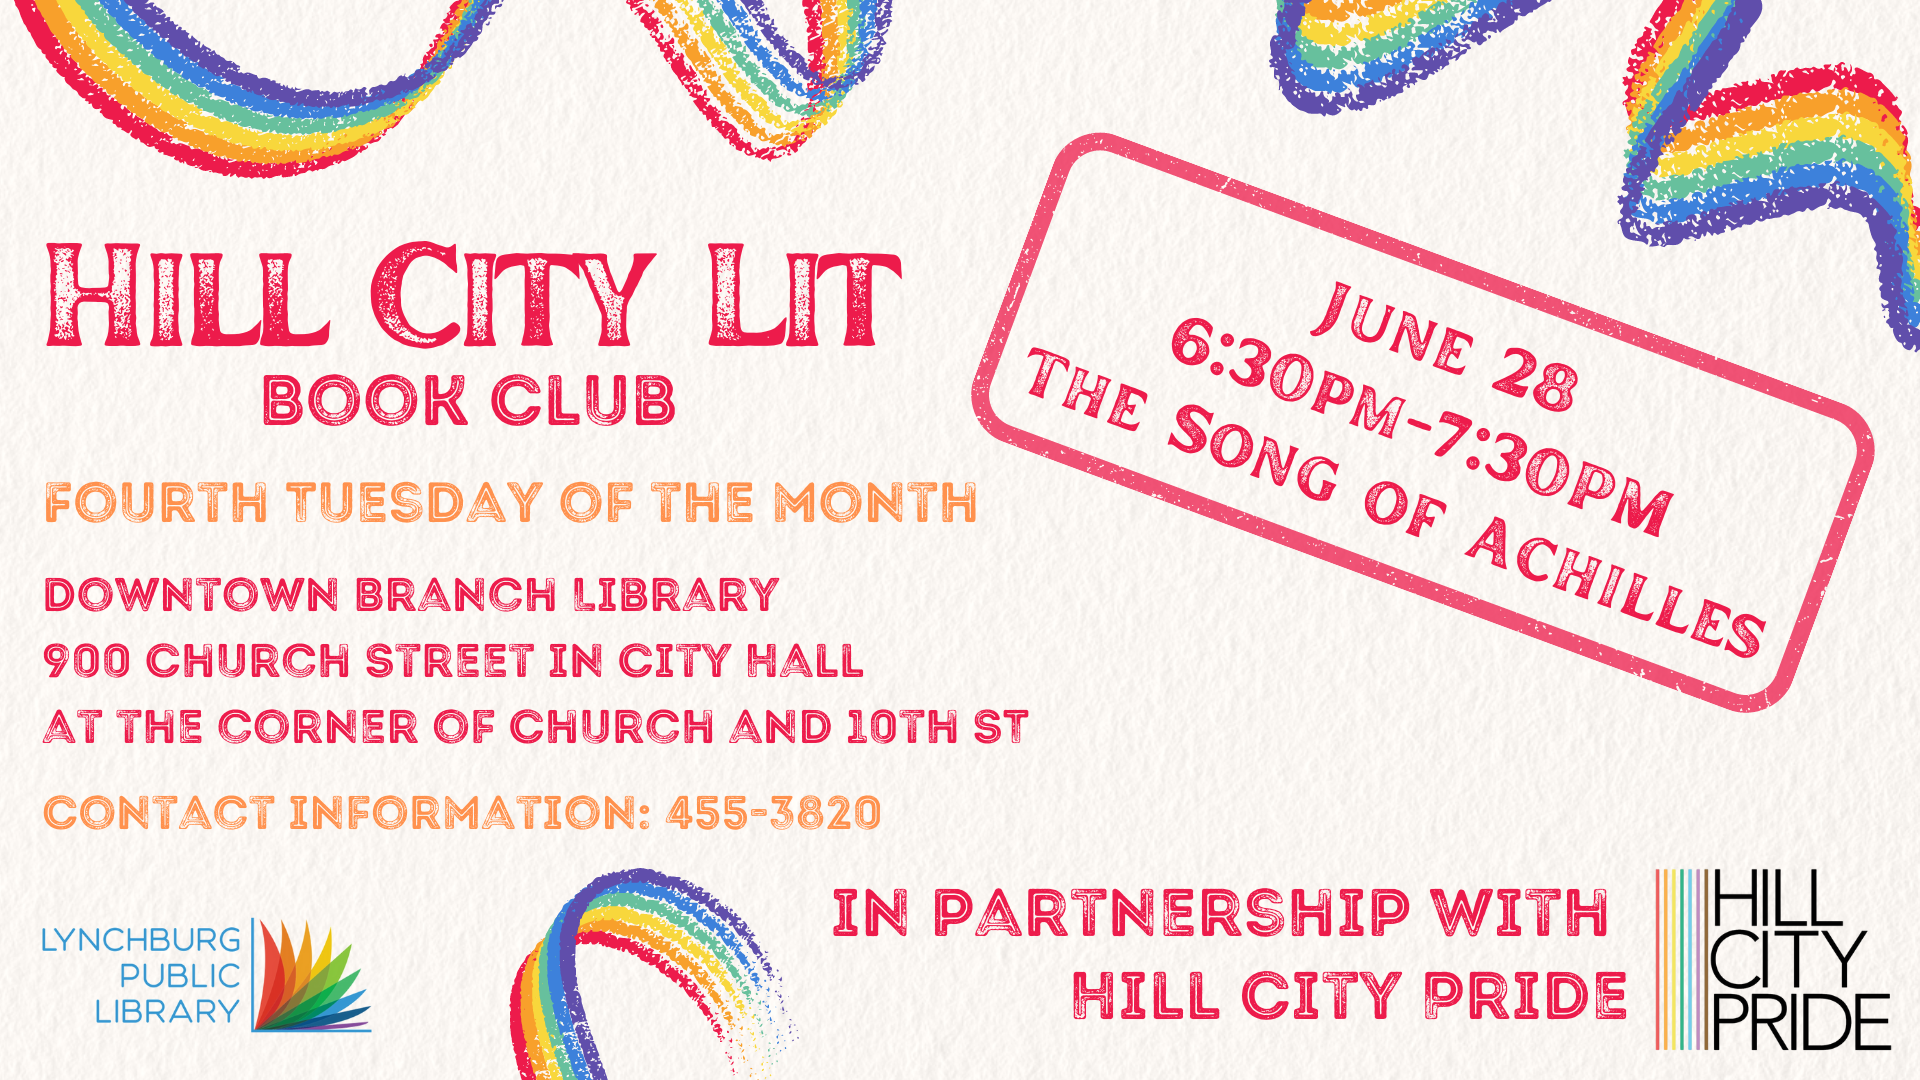 Hill City Lit Book Club for adults will meet on the fourth Tuesday of every month. The first meeting will meet at the Downtown Branch Library from 6:30 to 7:30 pm. The book we are discussing is The Song of Achilles.